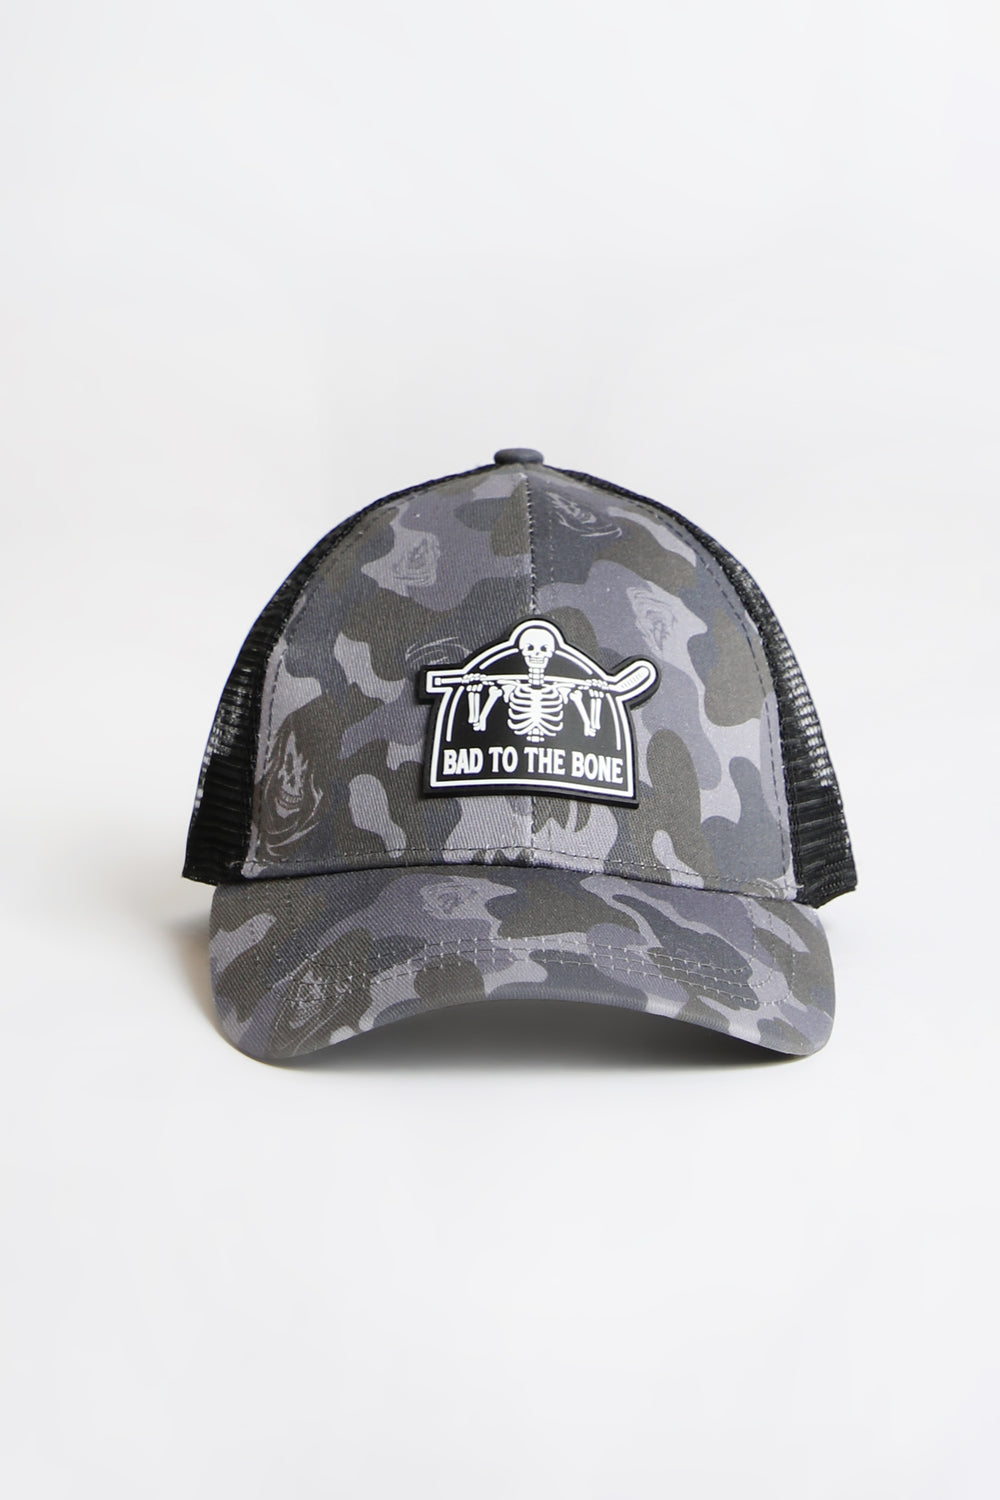 Arsenic Youth Skull Patch Camo Trucker Hat Arsenic Youth Skull Patch Camo Trucker Hat